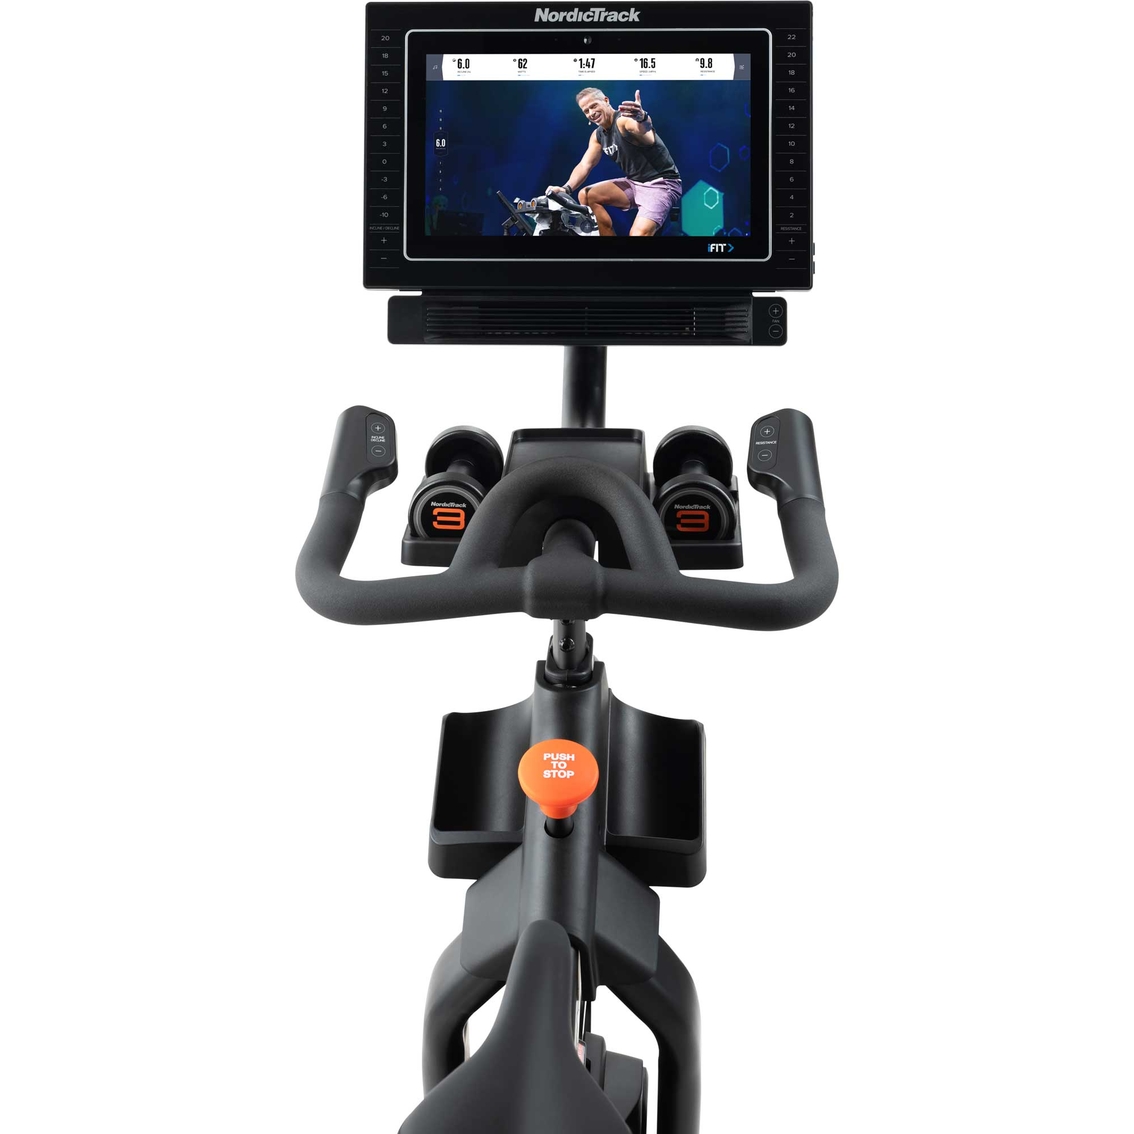 NordicTrack Commercial S15i Exercise Bike - Image 2 of 3